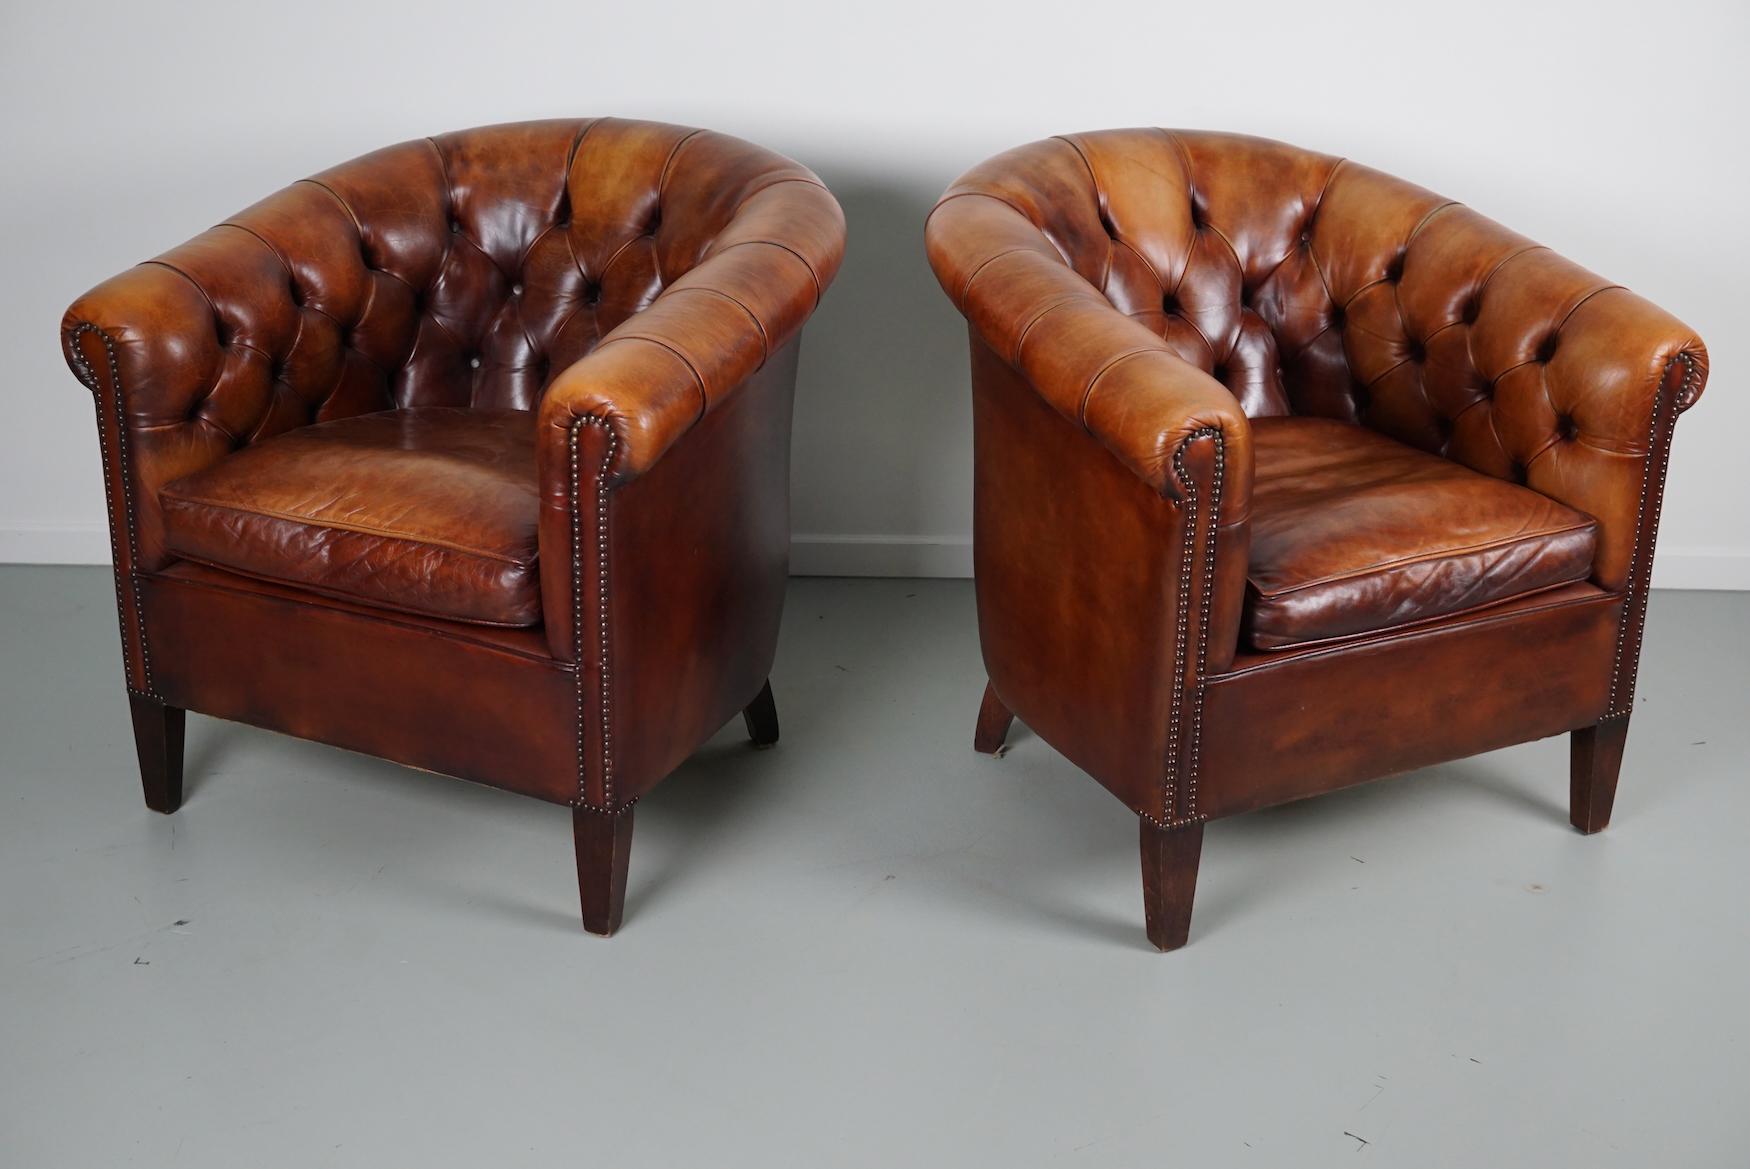 Vintage Dutch Chesterfield Cognac Leather Club Chairs, Set of 2 6